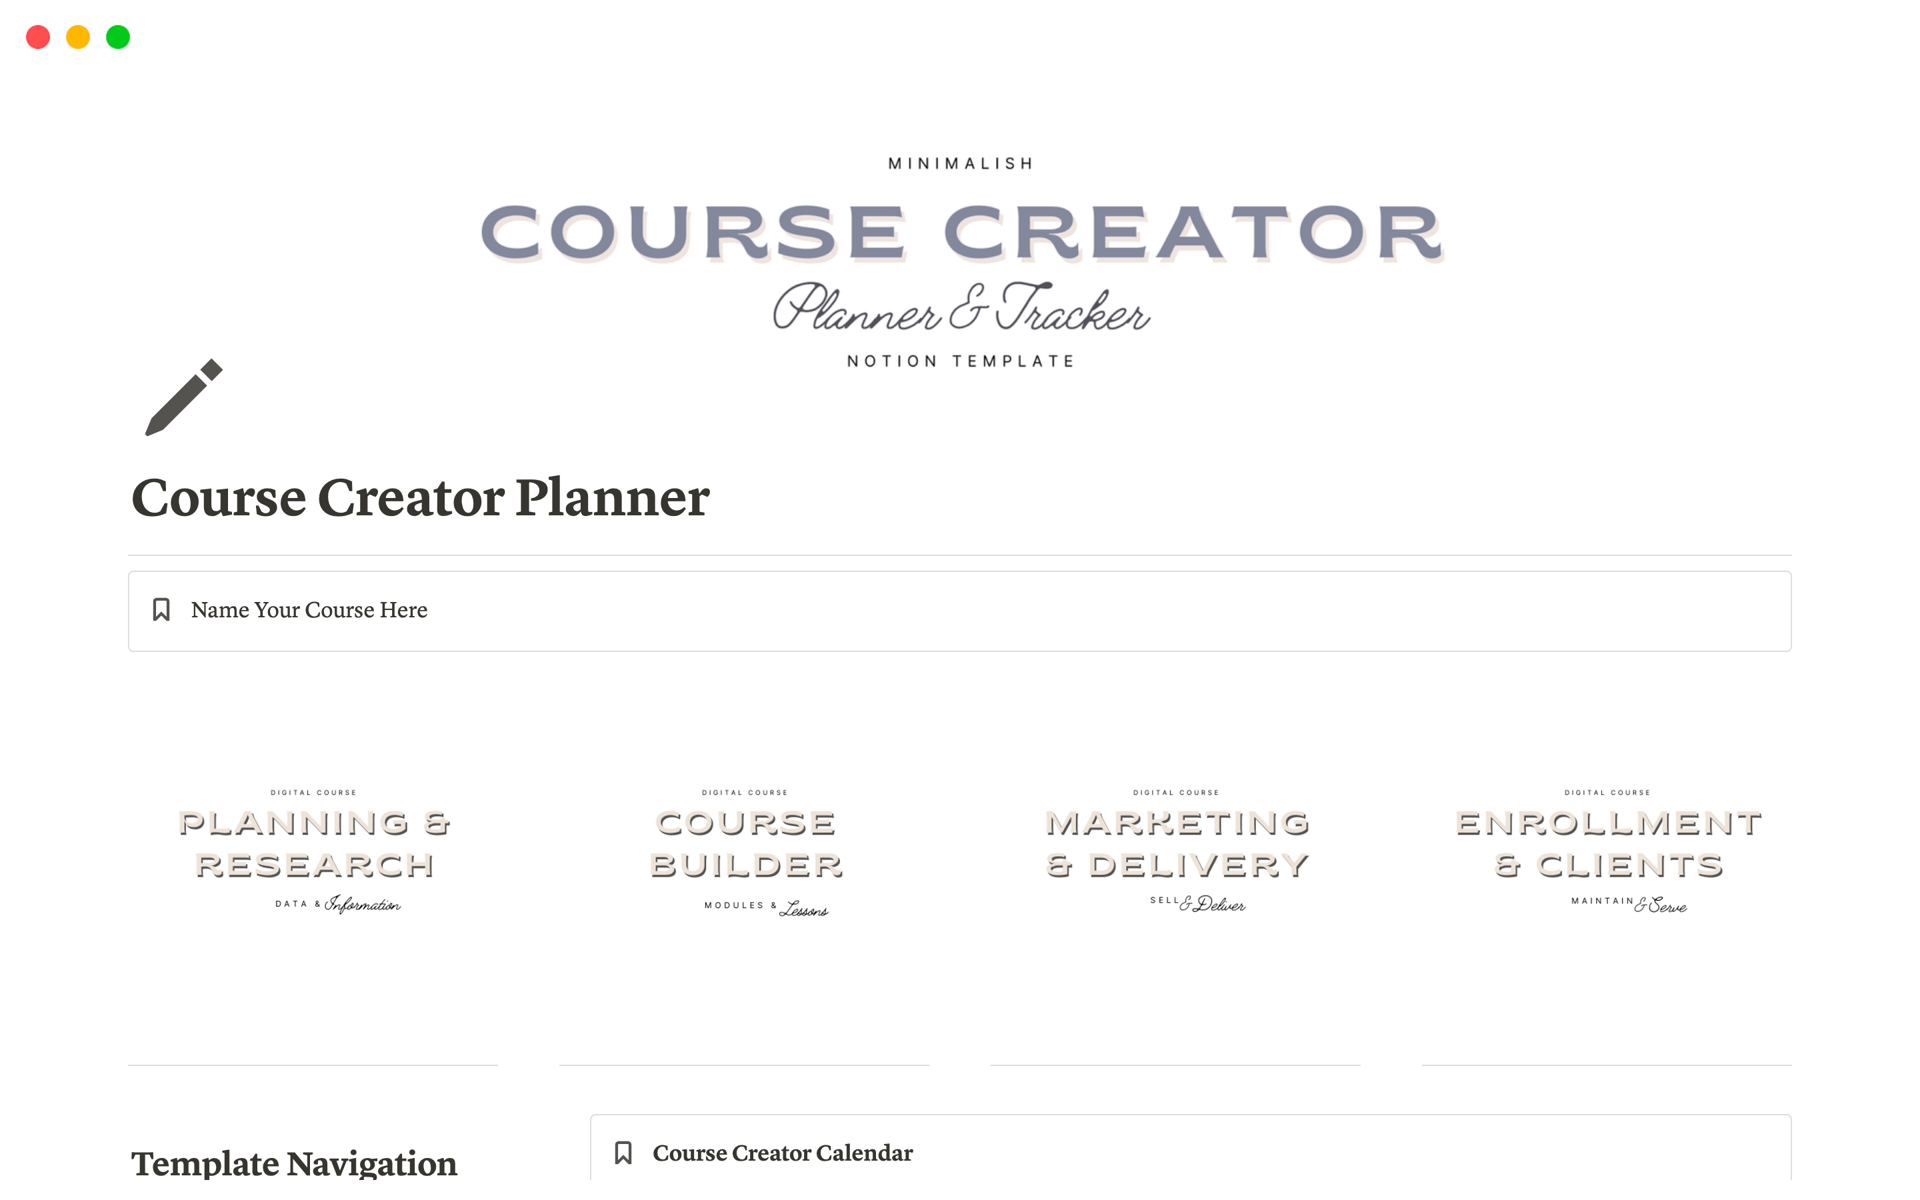 A template preview for Digital Course Creator Planner